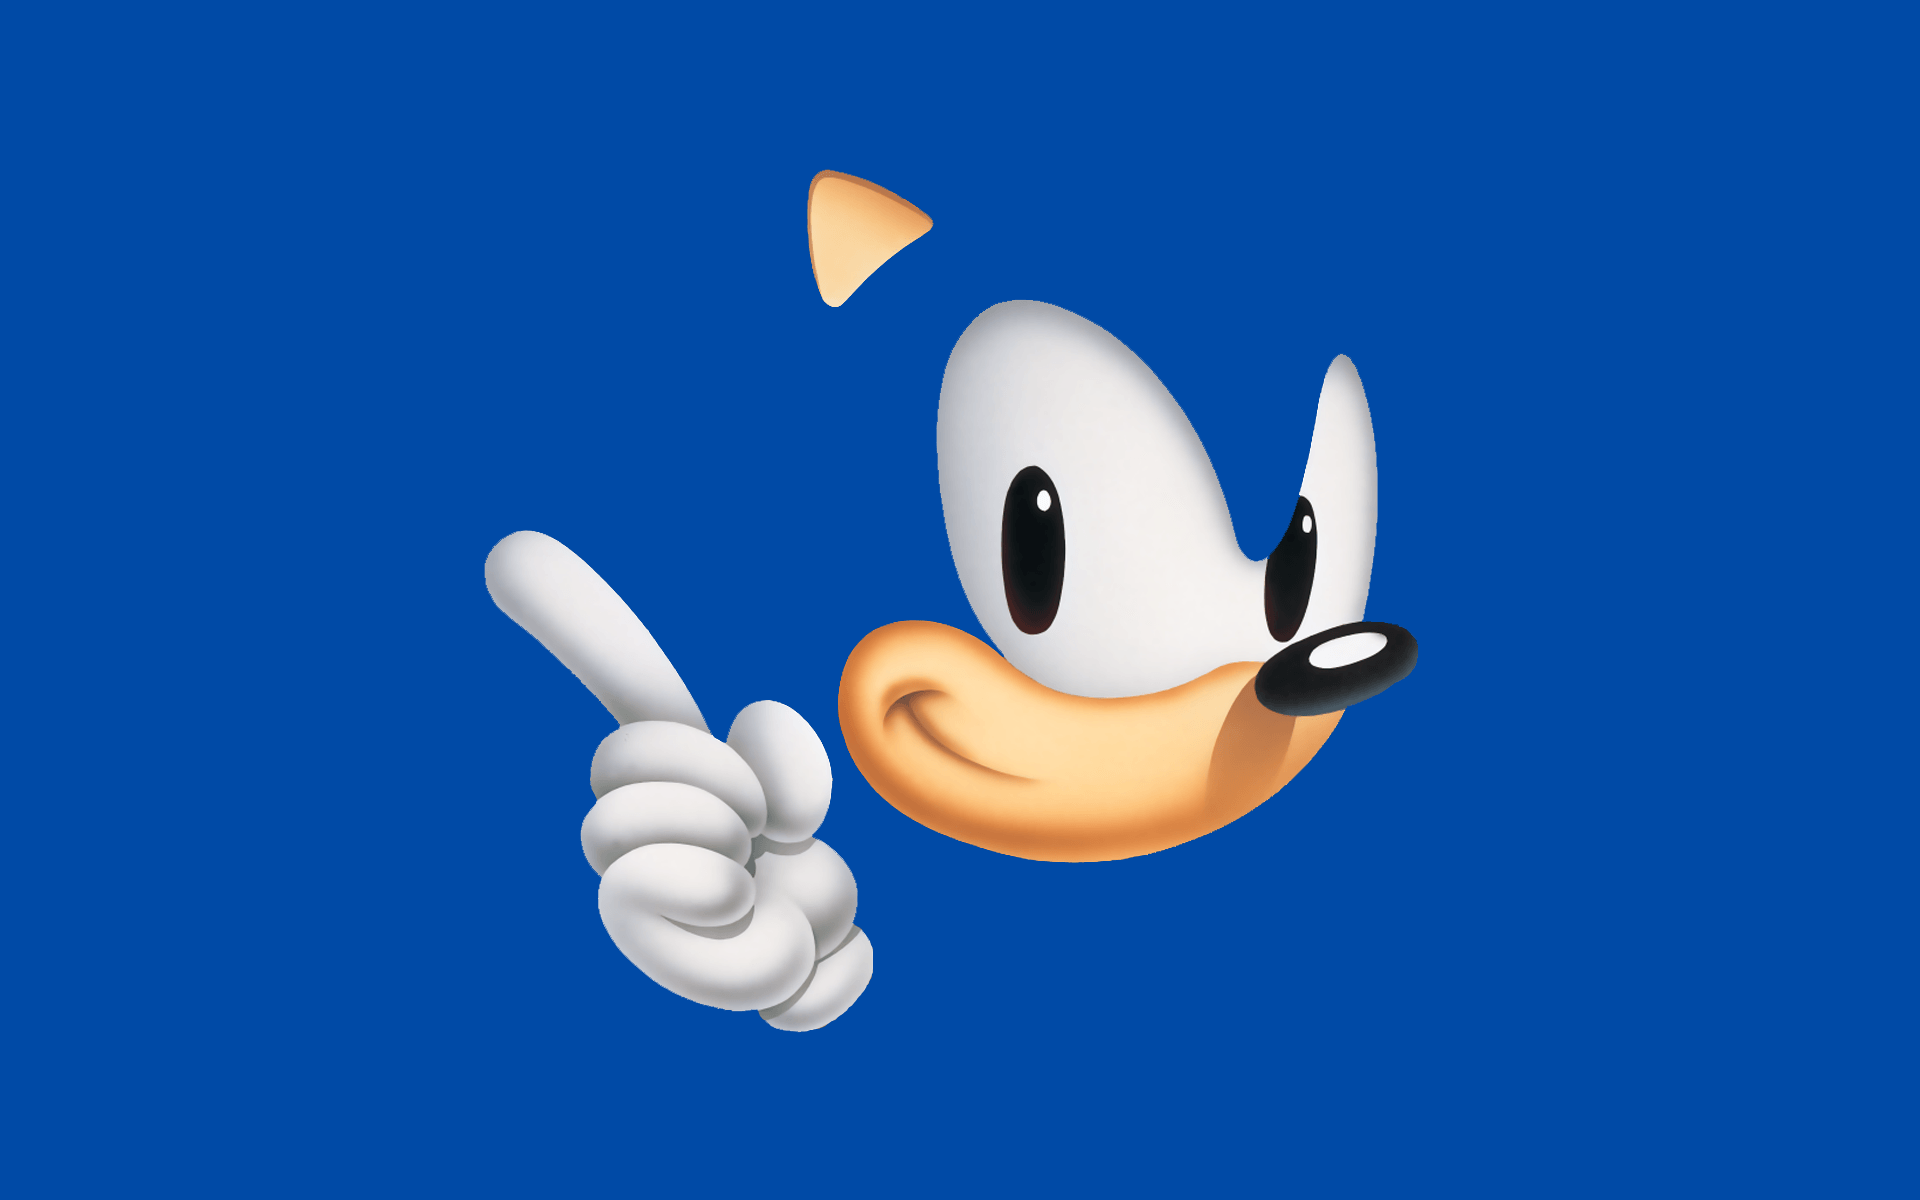 Sonic The Hedgehog Wallpapers - Wallpaper Cave